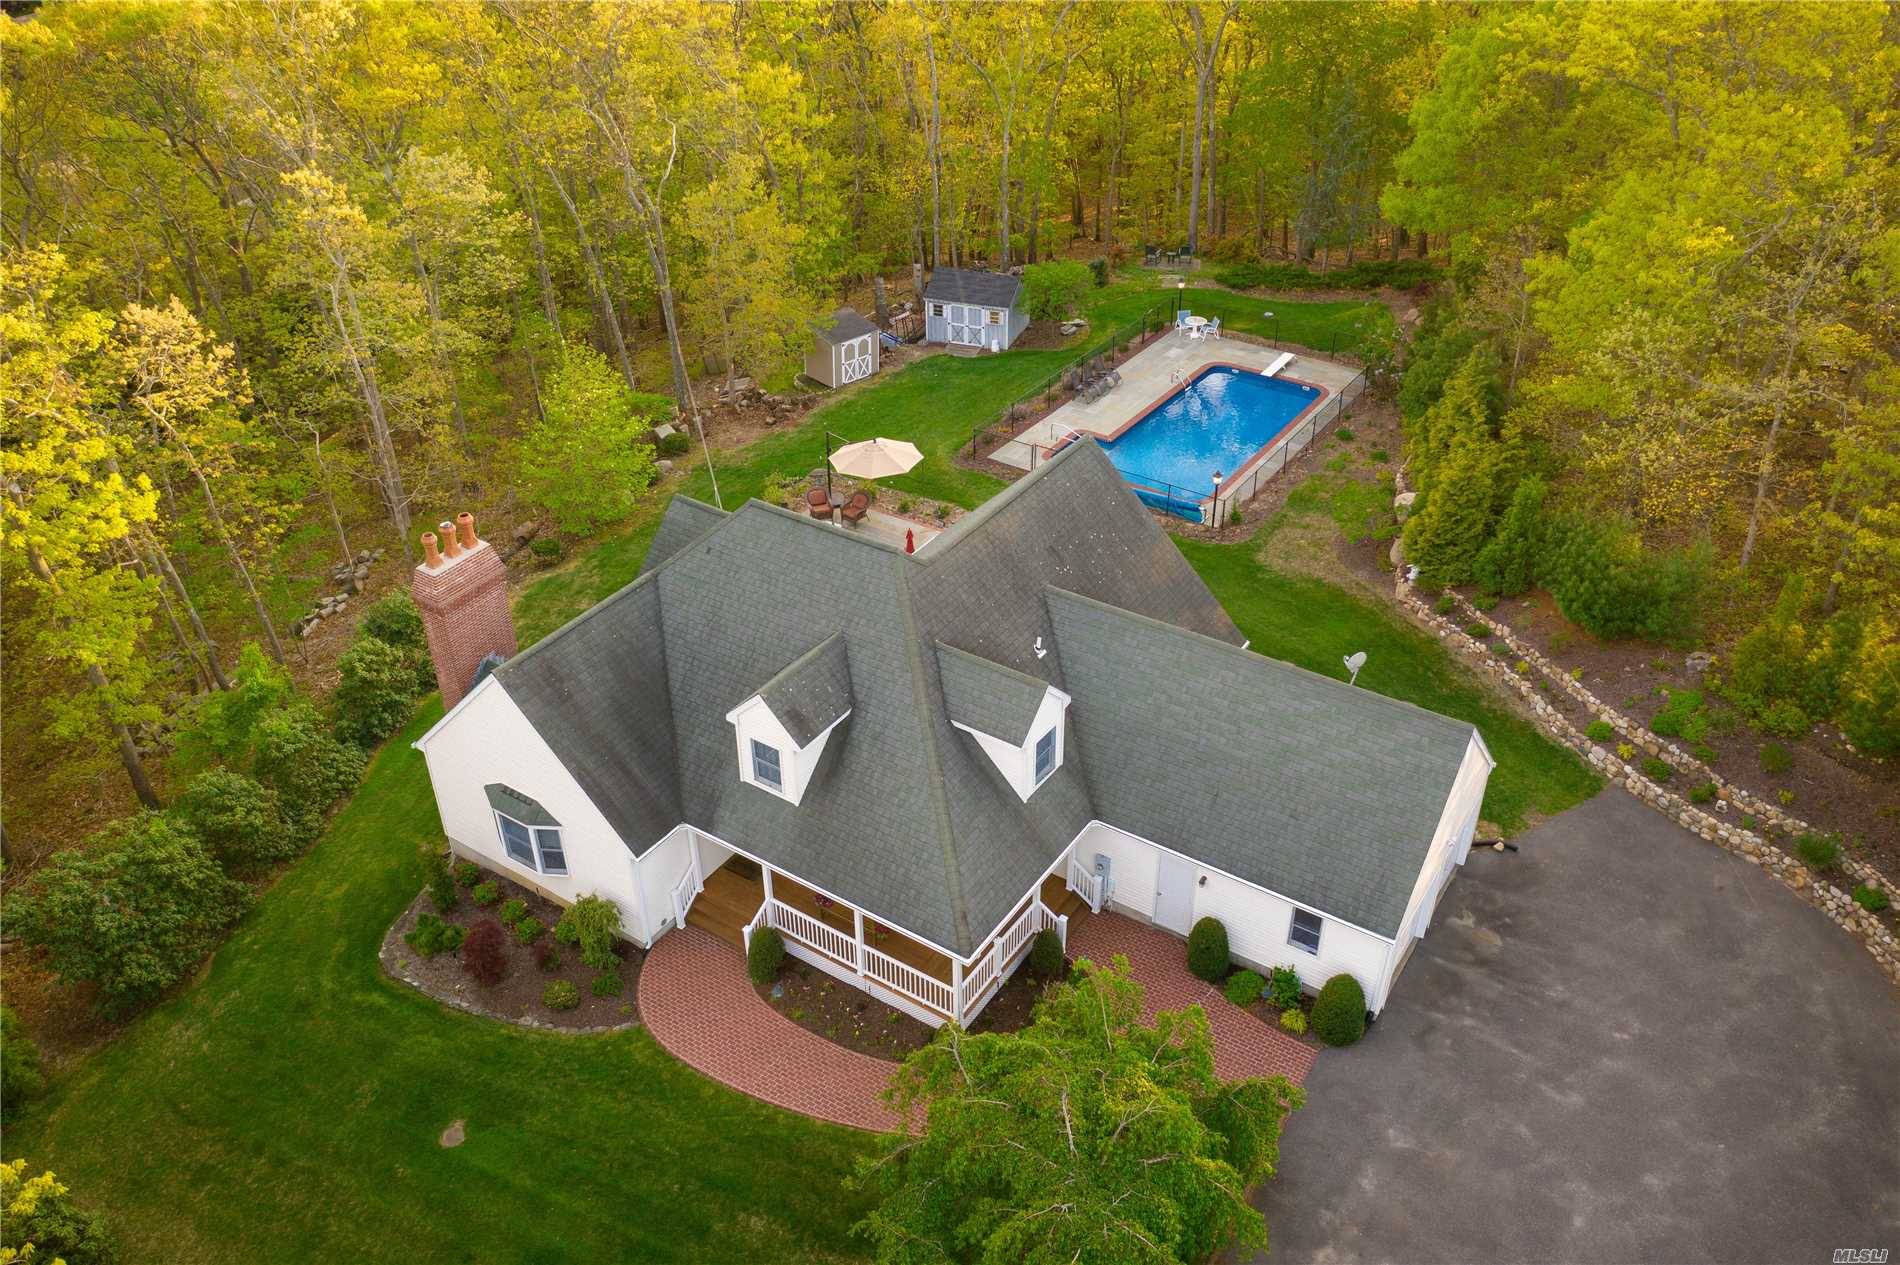 Just Reduced ! Drone Tour see link Impeccable private 2 1 12 acre young 1997 custom built featuring country club backyard w ig heated salt h2o pool, brick and stone ...